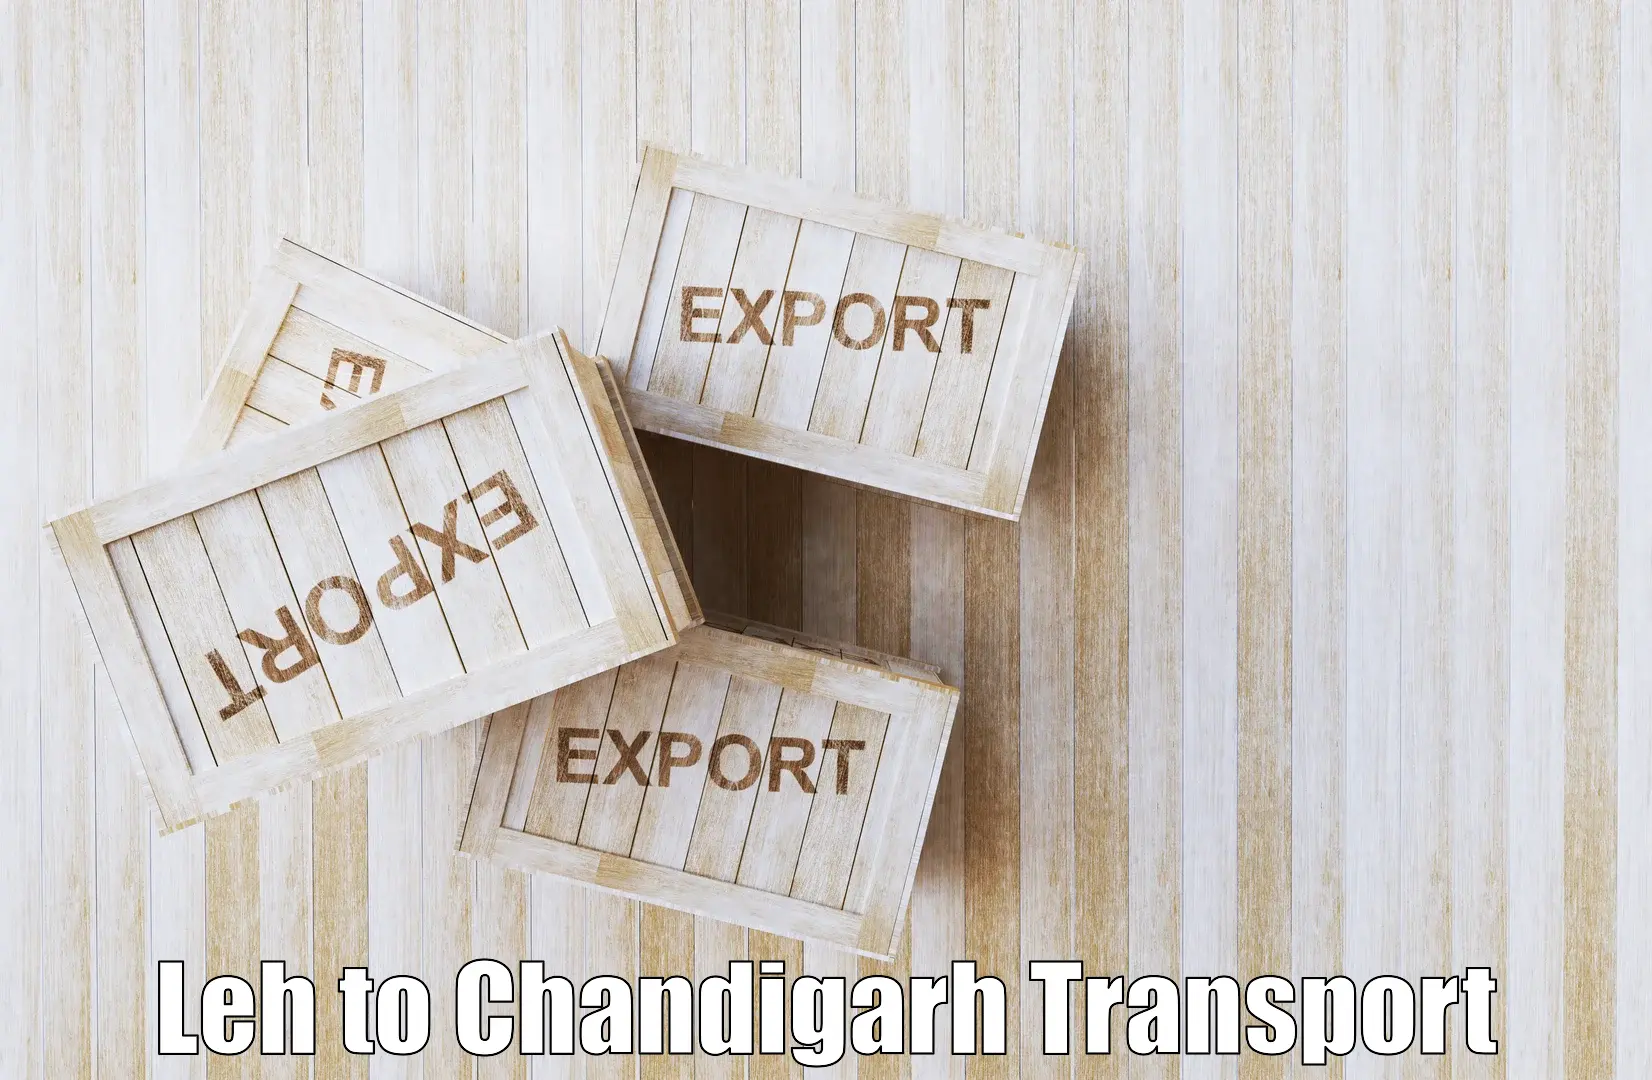 Container transport service Leh to Chandigarh